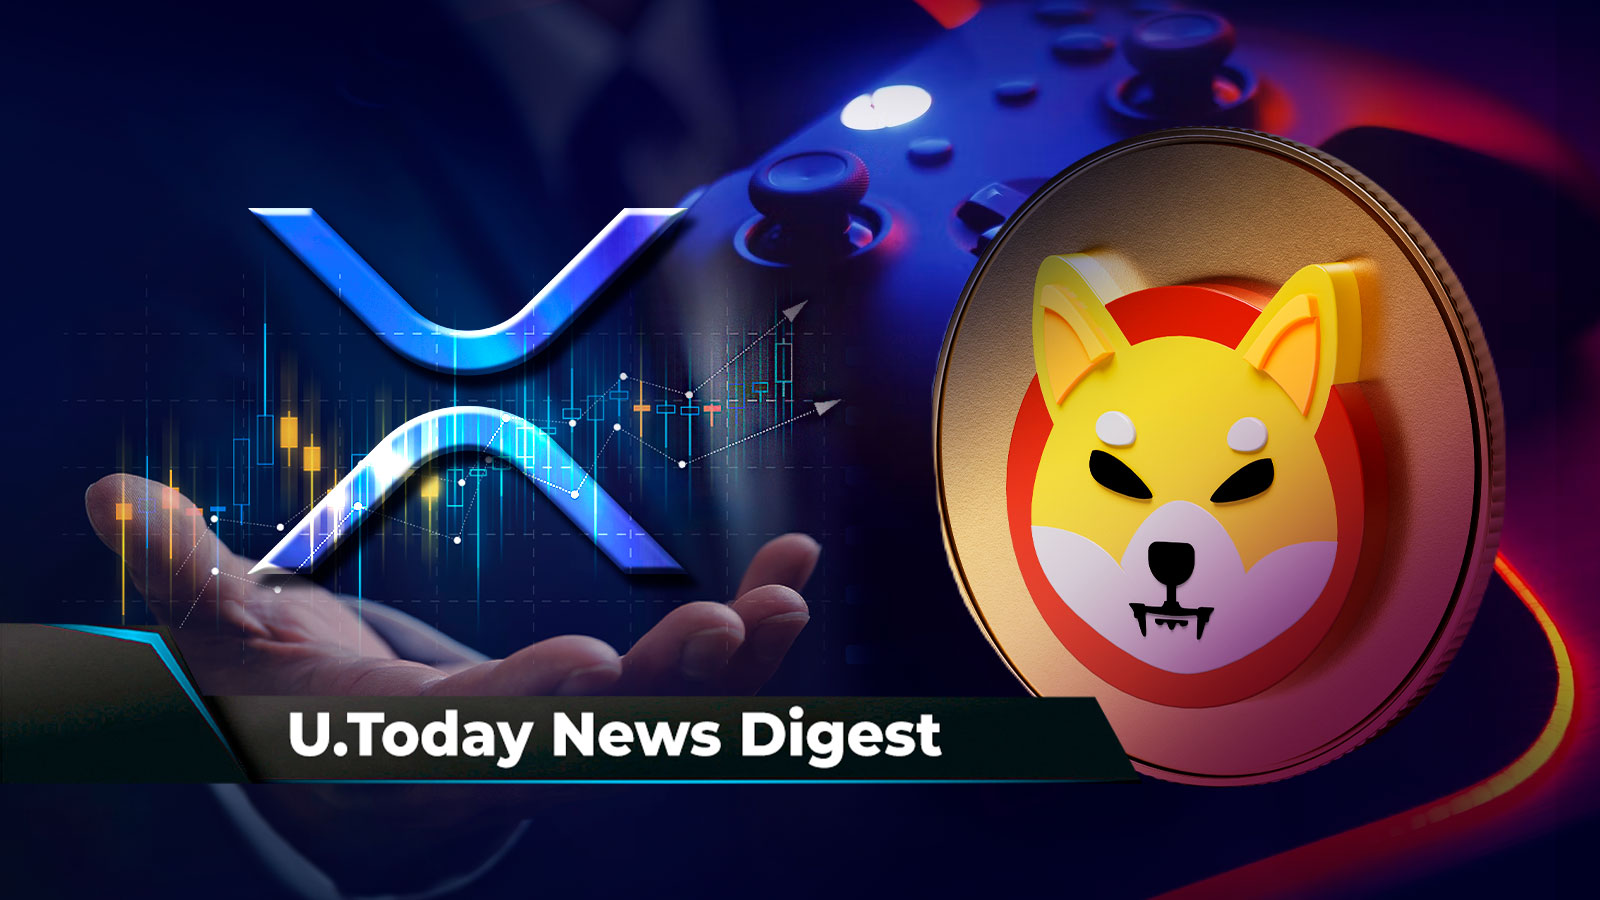 Shiba Eternity to Feature at Largest Gaming Event, XRP Has One of Best Looking Charts, Cardano Tops PayPal and Netflix with Low Energy Use: Crypto News Digest by U.Today